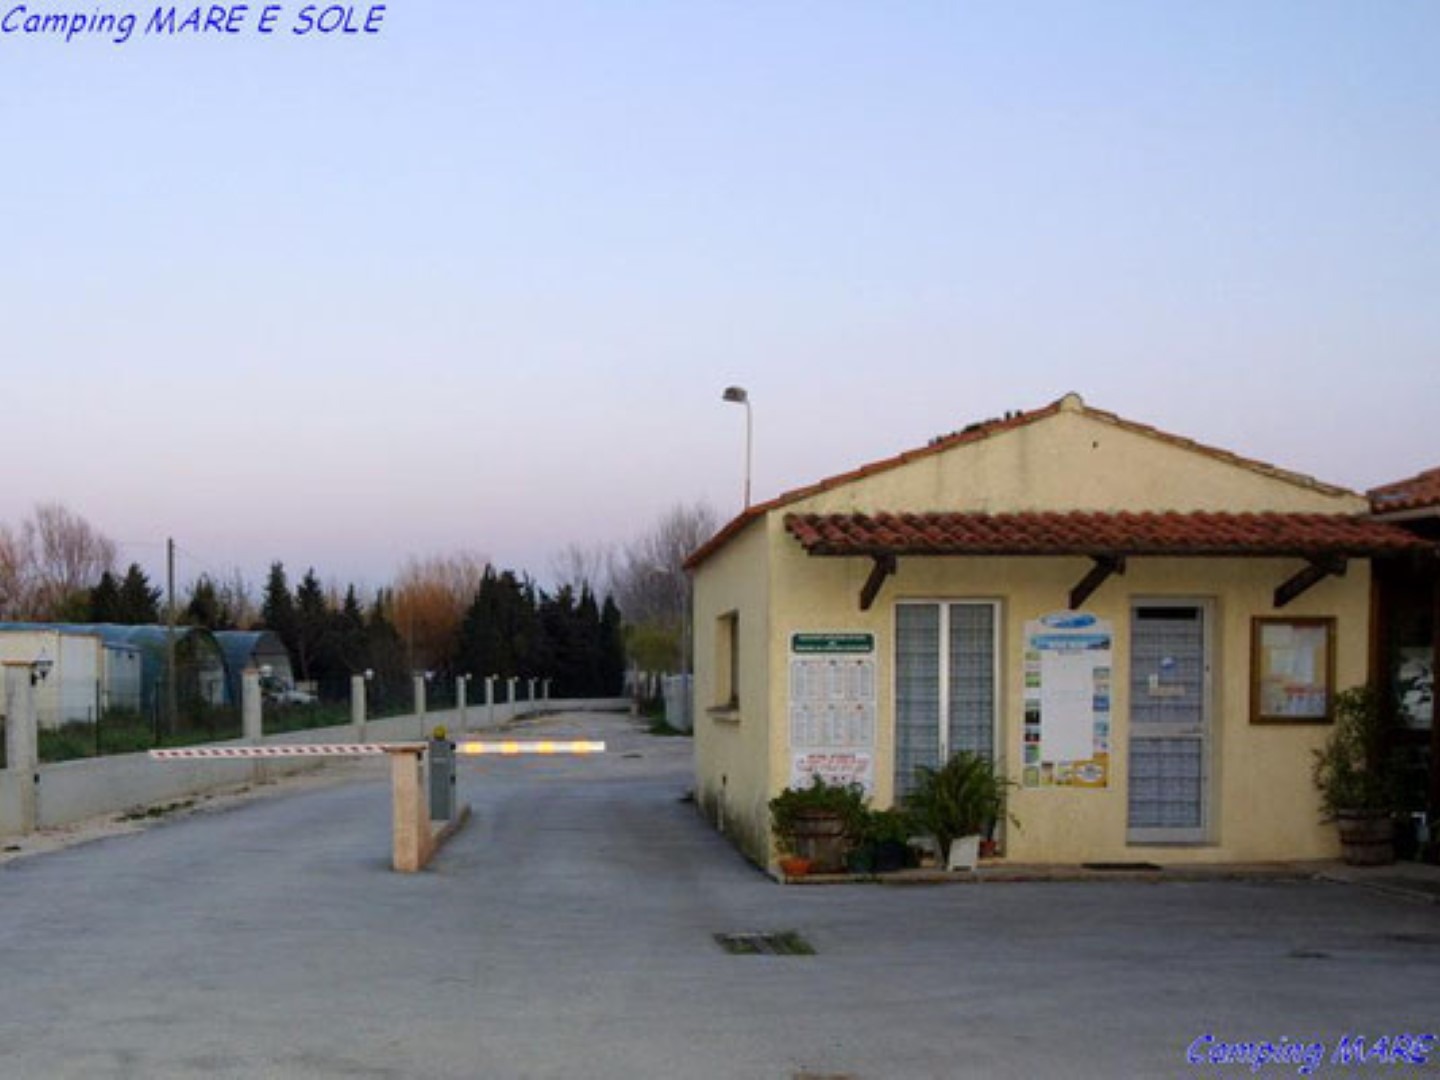 franzosisch-camping Camping mare e sole Hyres